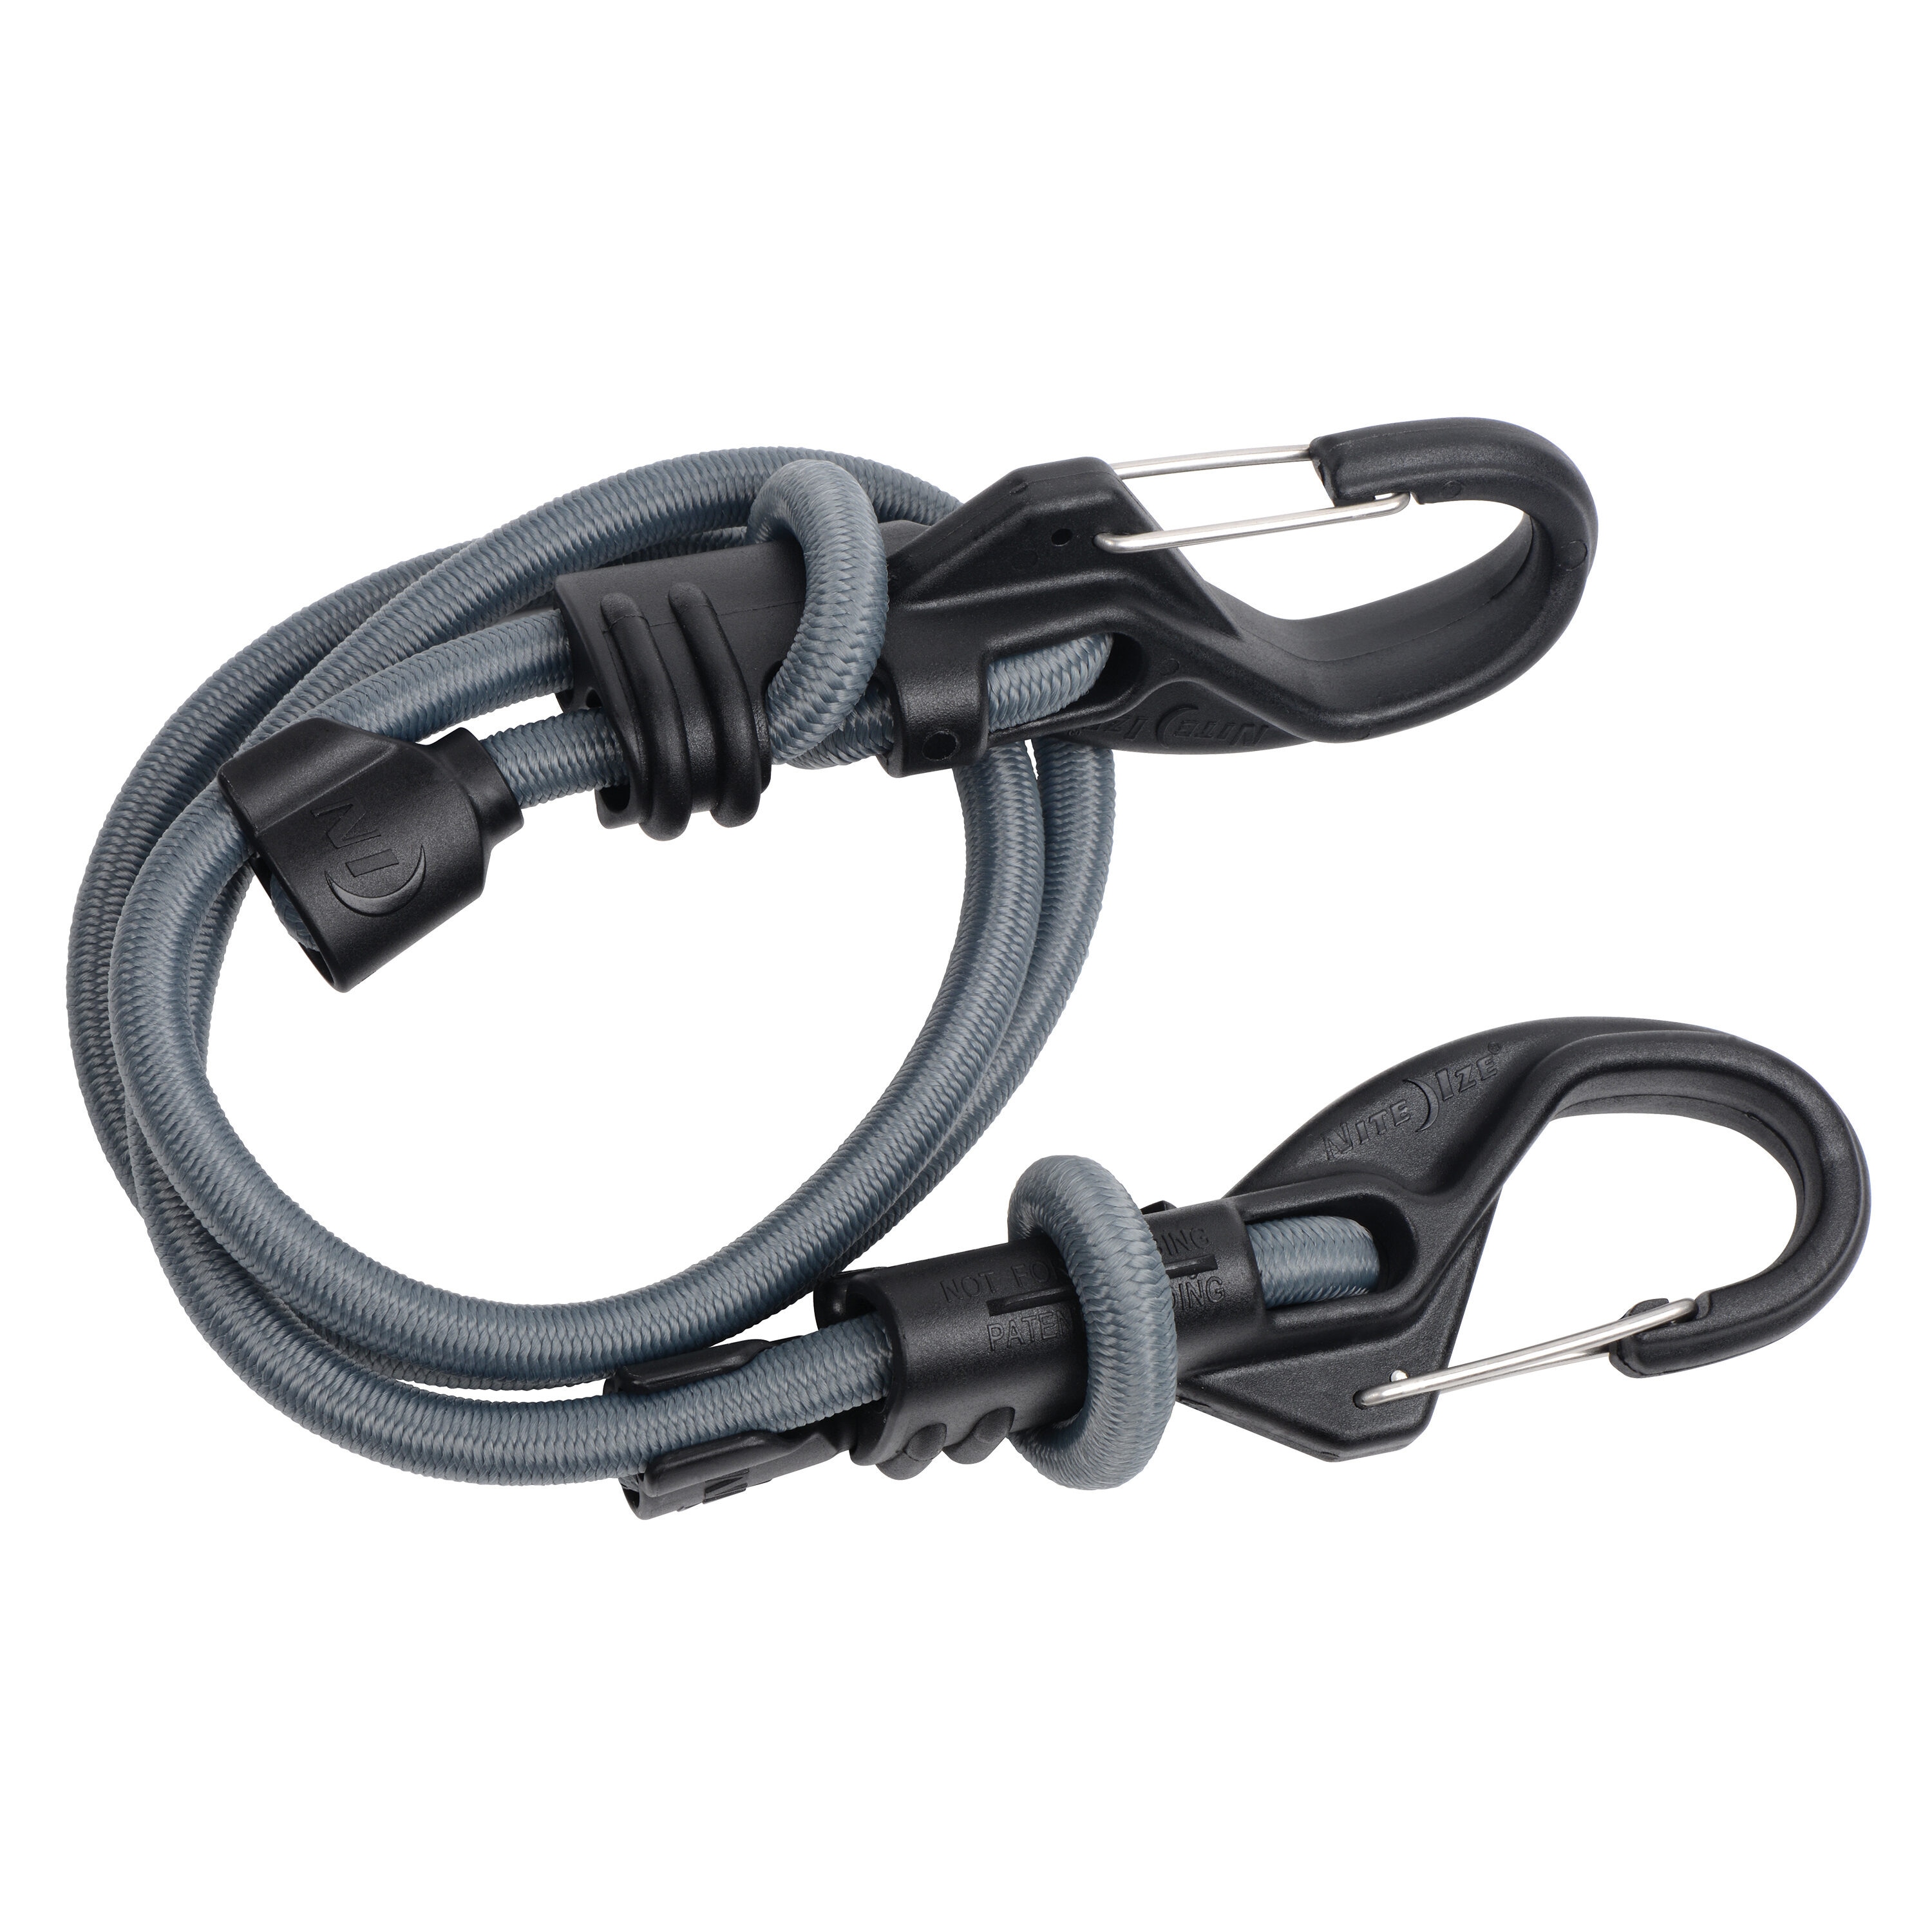 Nite Ize Adjustable Bungee Cord 4-ft - 9mm Rubber Core, Nylon Jacket,  UV/Weather Resistant, Plastic Hooks, Grey Cord, Black KnotBone Carabiner  Clips in the Bungee Cords department at